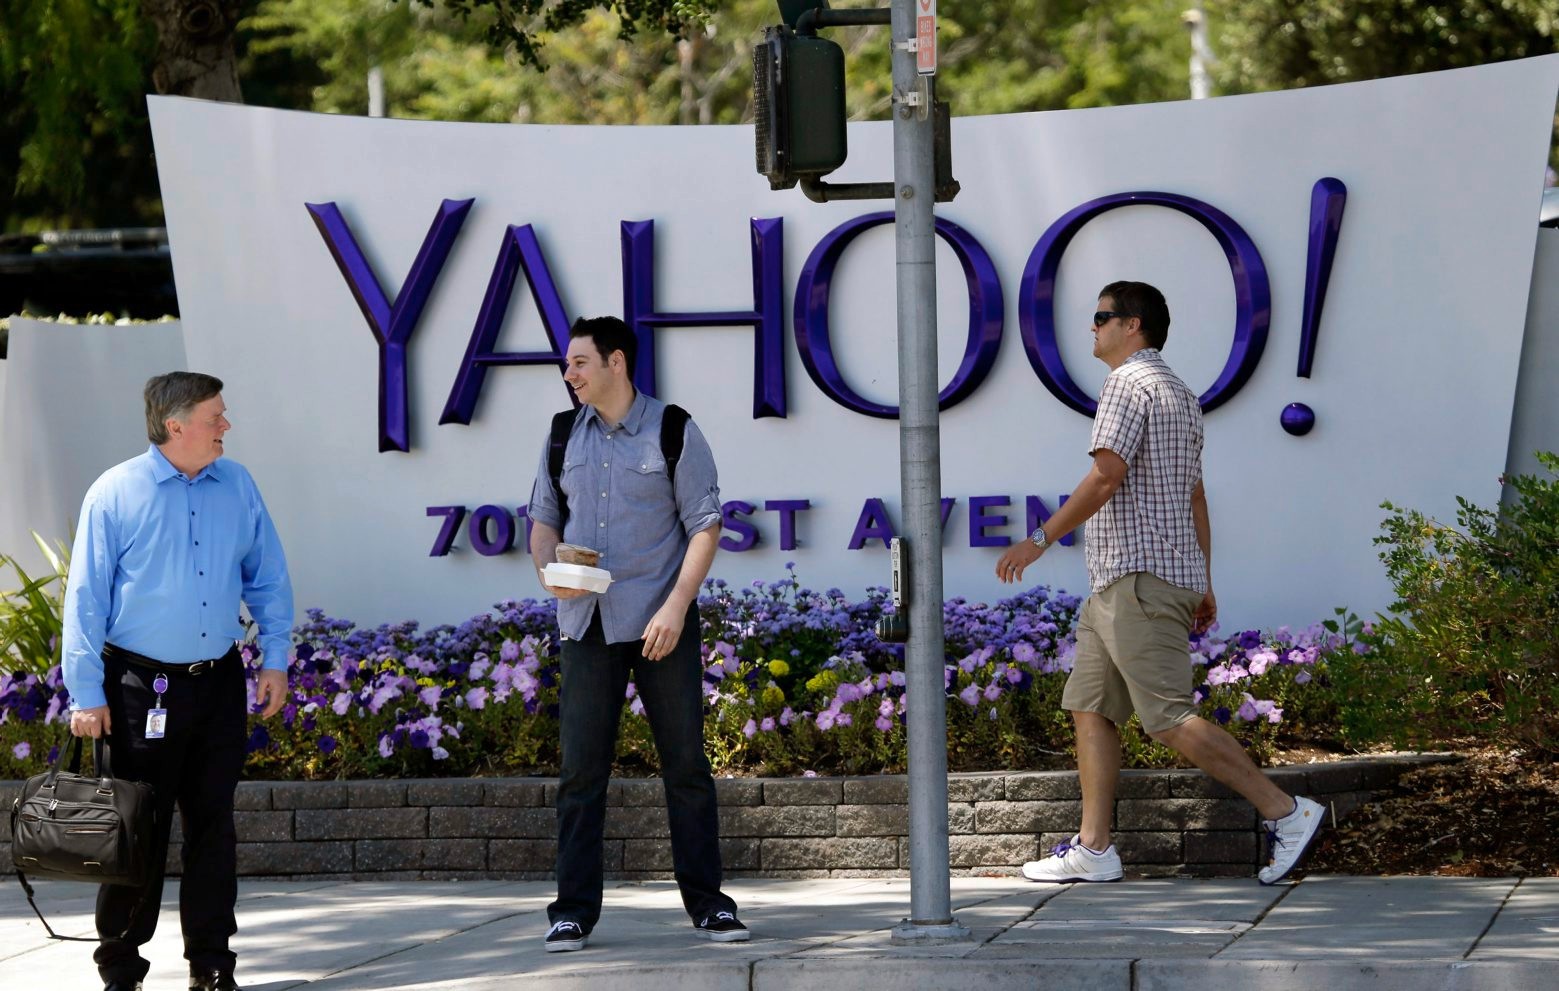 FILE - In this June 5, 2014, file photo, people walk in front of a Yahoo sign at the company's headquarters in Sunnyvale, Calif. Yahoo says the personal information of 500 million accounts have been stolen in a massive security breakdown that represents the latest setback for the beleaguered internet company. The breach disclosed on Thursday, Sept. 22, 2016, dates back to late 2014. Yahoo is blaming the hack on a Äústate-sponsored actor.Äù (AP Photo/Marcio Jose Sanchez, File) Yahoo Breach